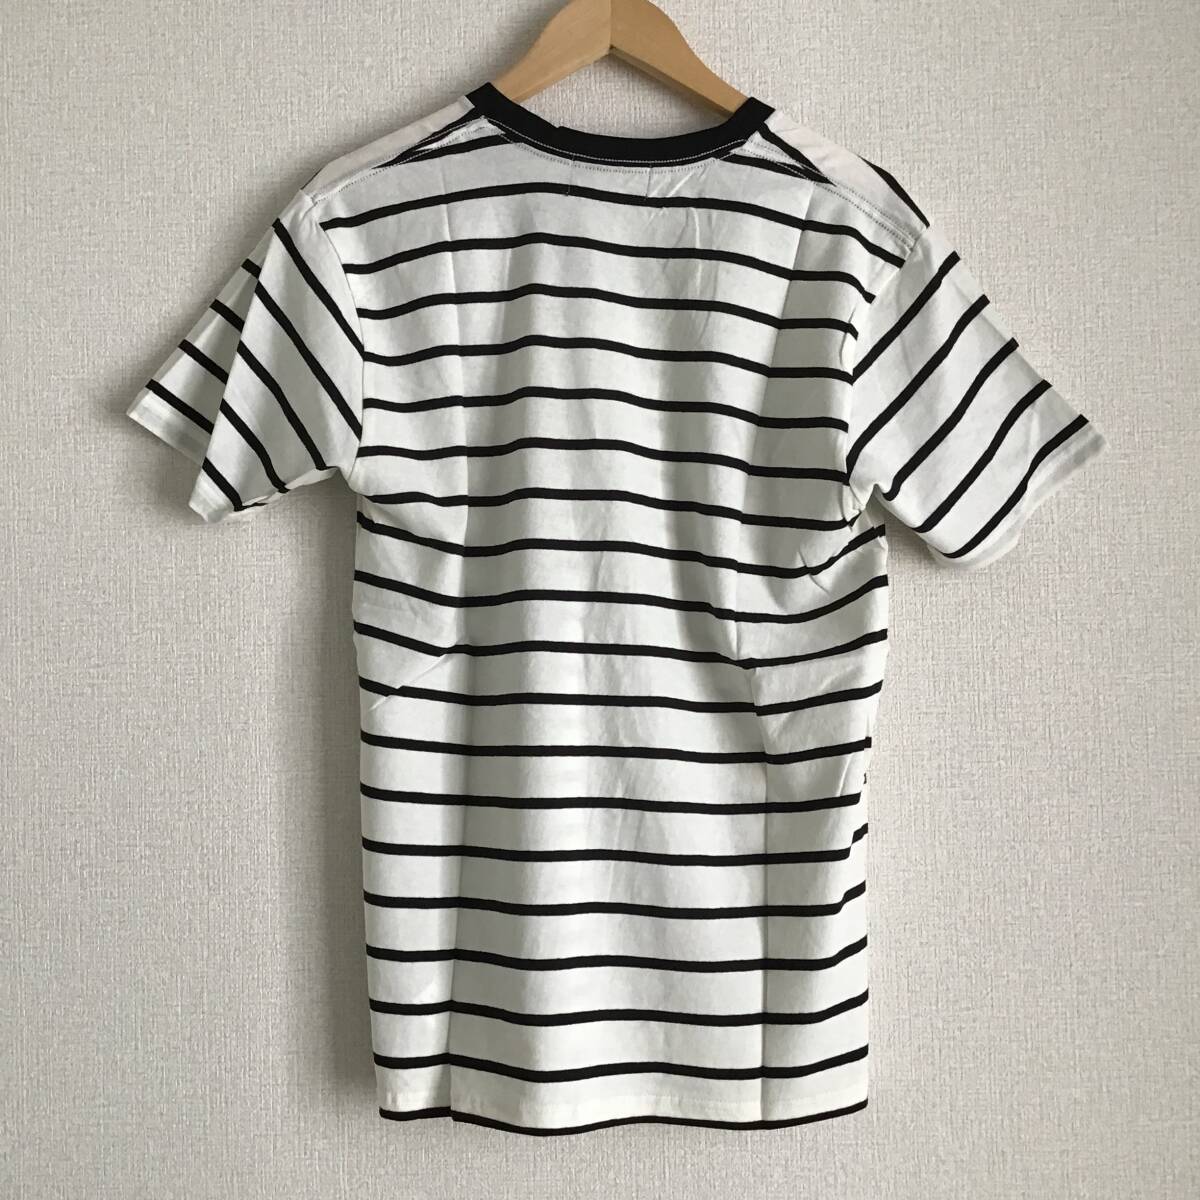  azur bai Moussy T-shirt lady's M size new goods unused anonymity delivery 